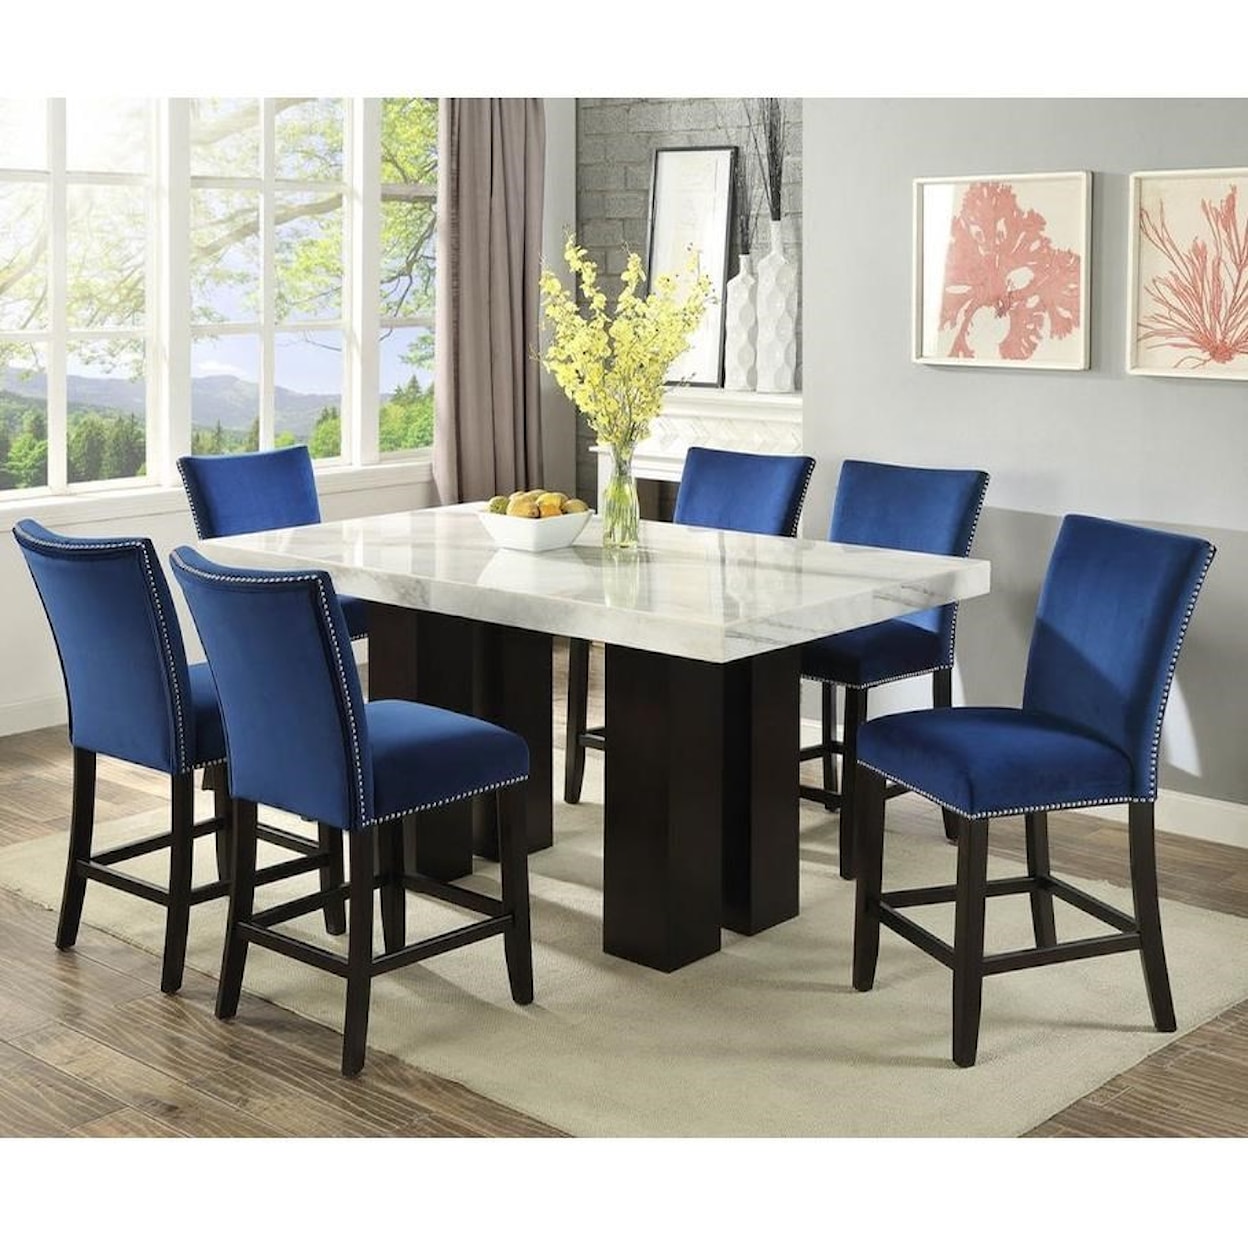 Prime Camila 7 Piece Counter Height Dining Set